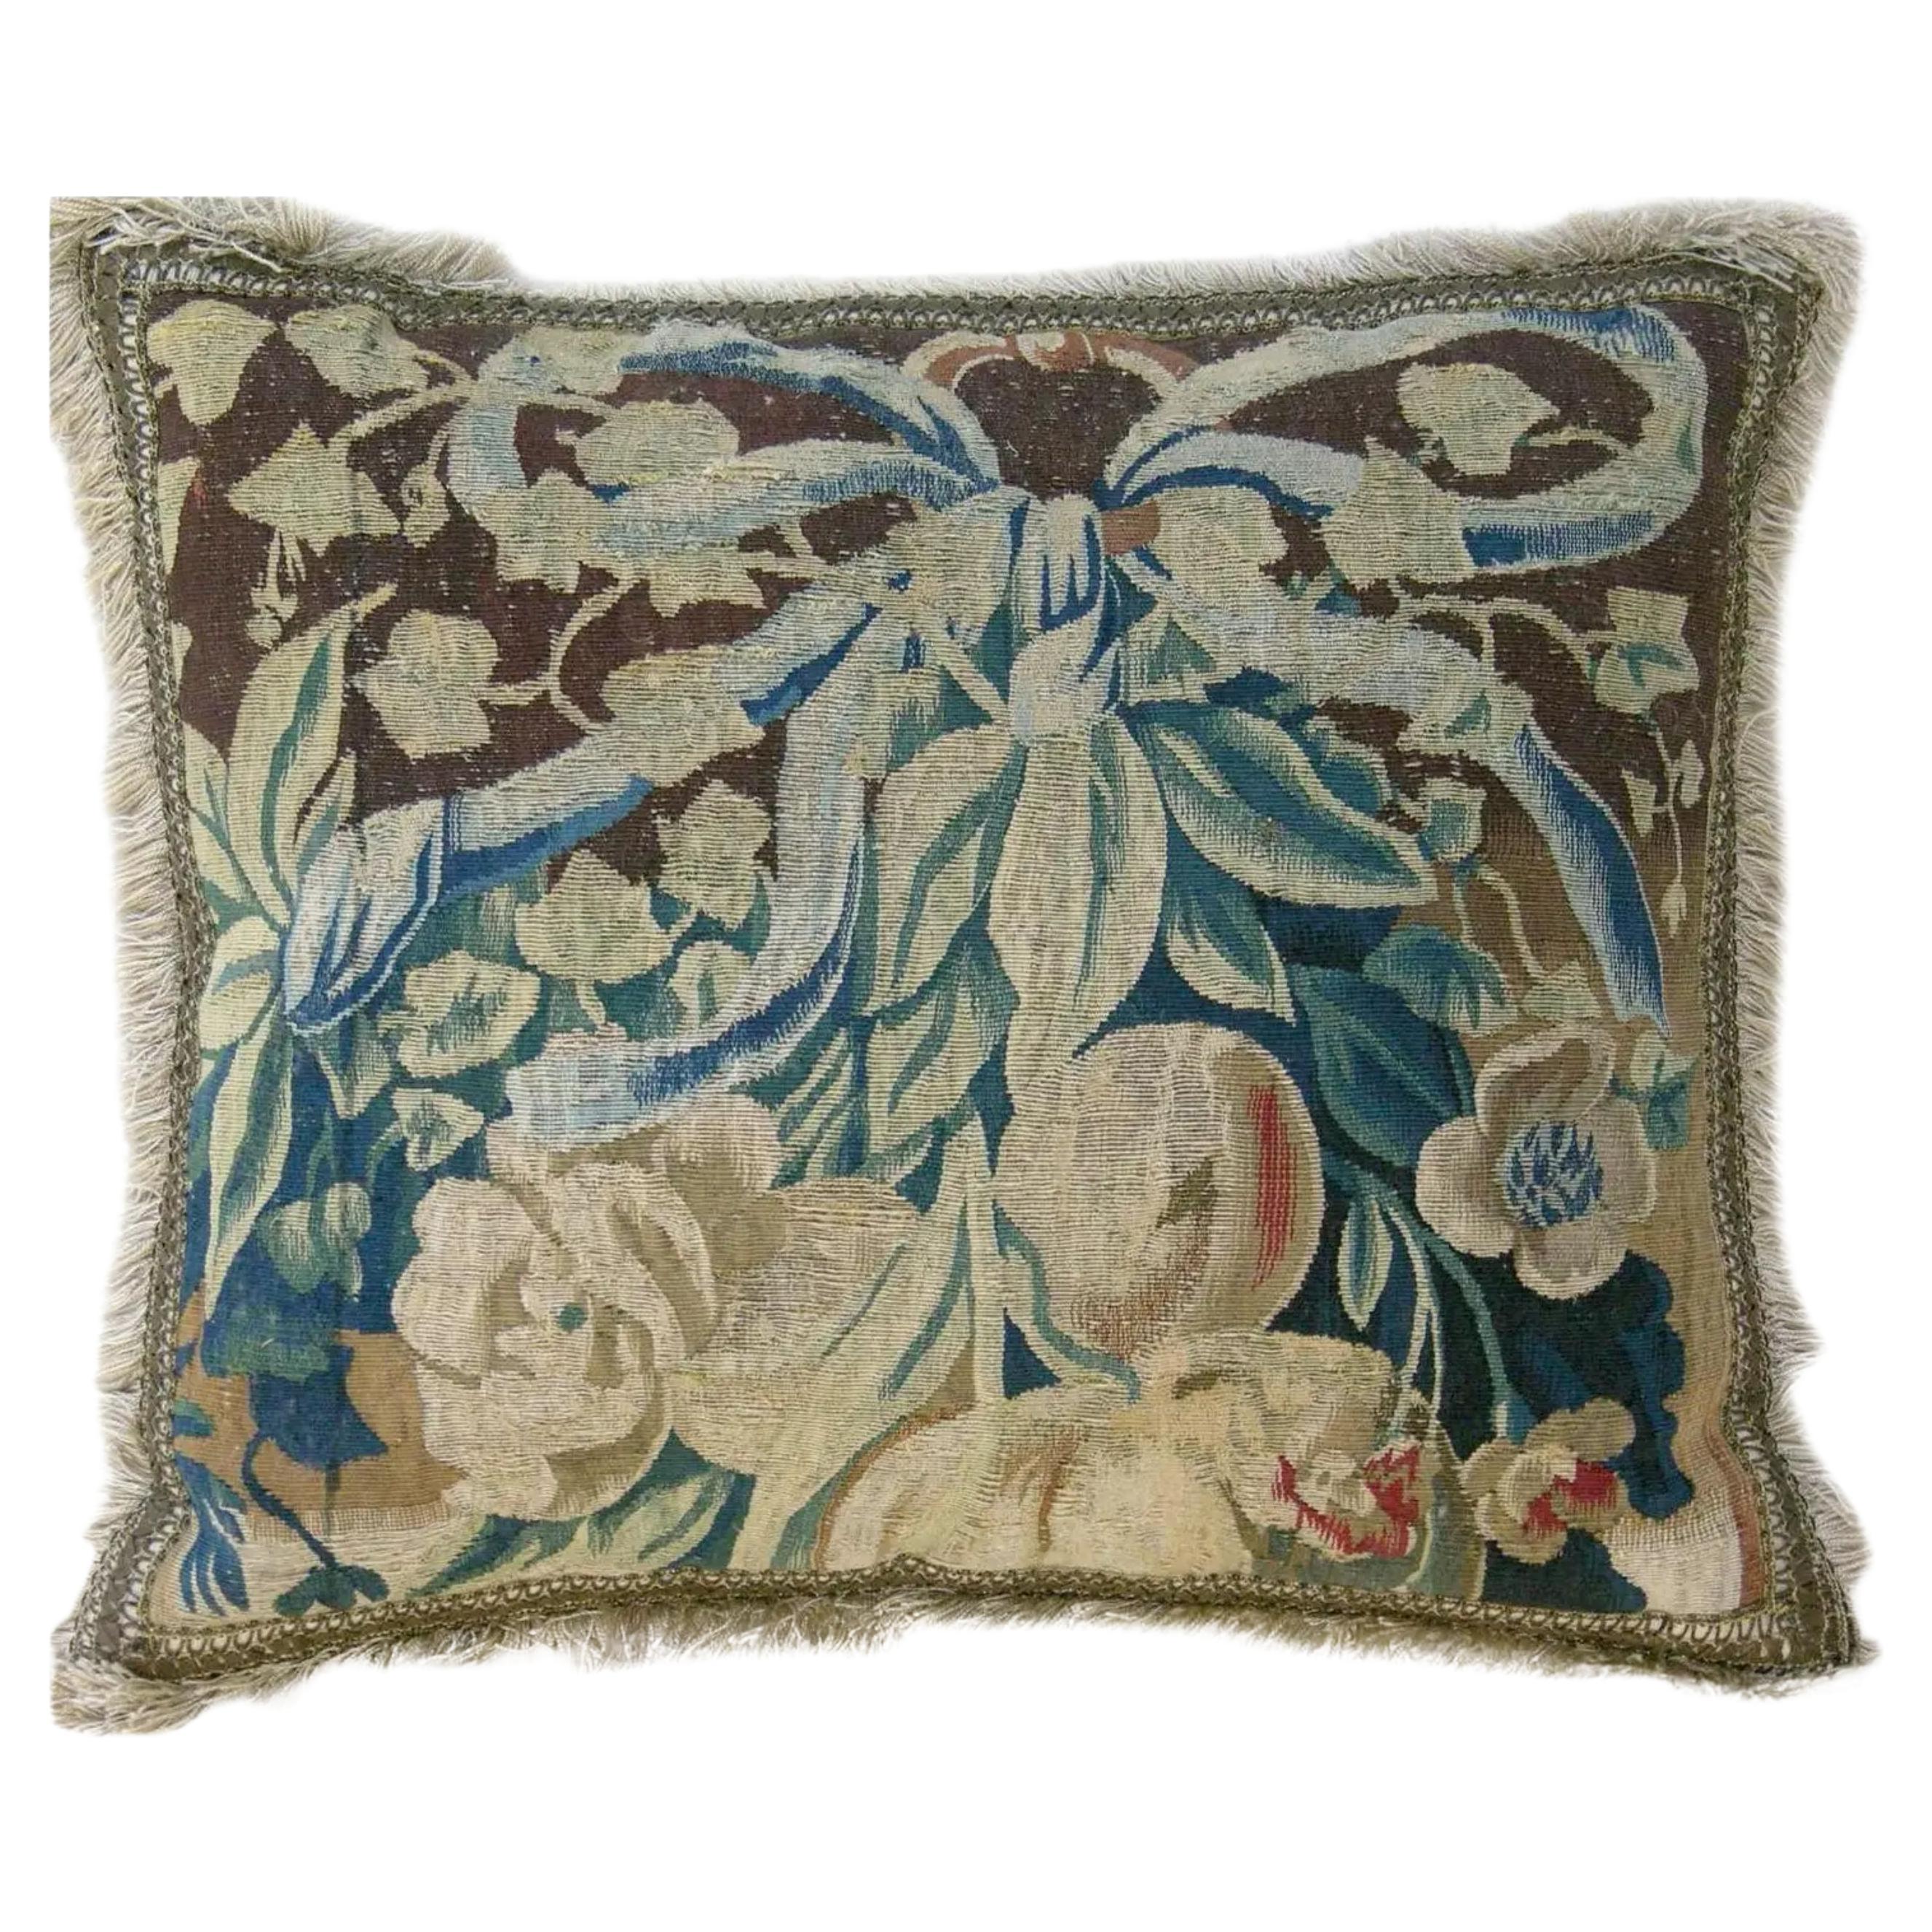 Antique 16th Century Brussels Tapestry Pillow - 23'' X 19'' For Sale